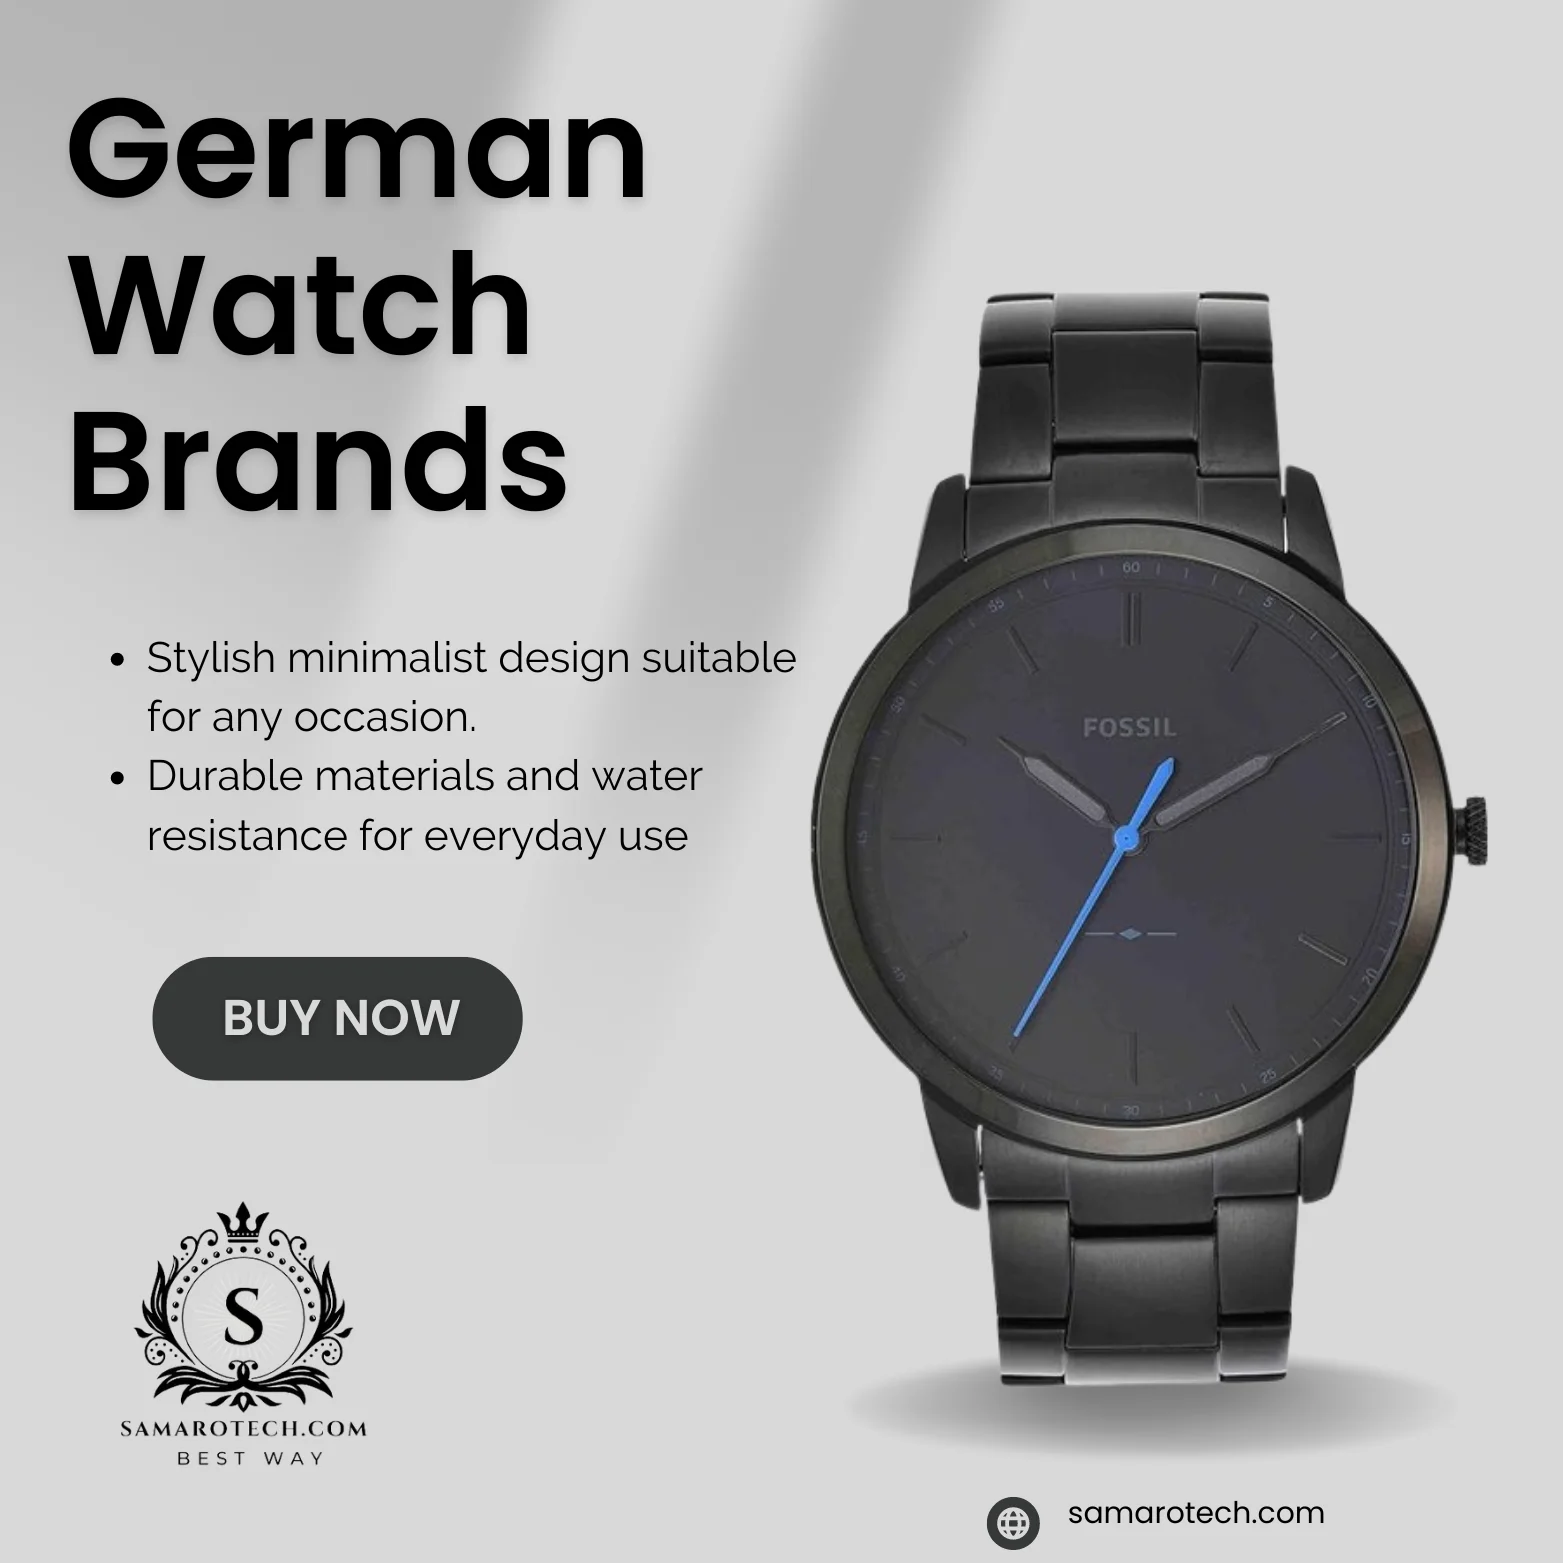 German Watch Brands: Top 5 Picks for Style & Precision